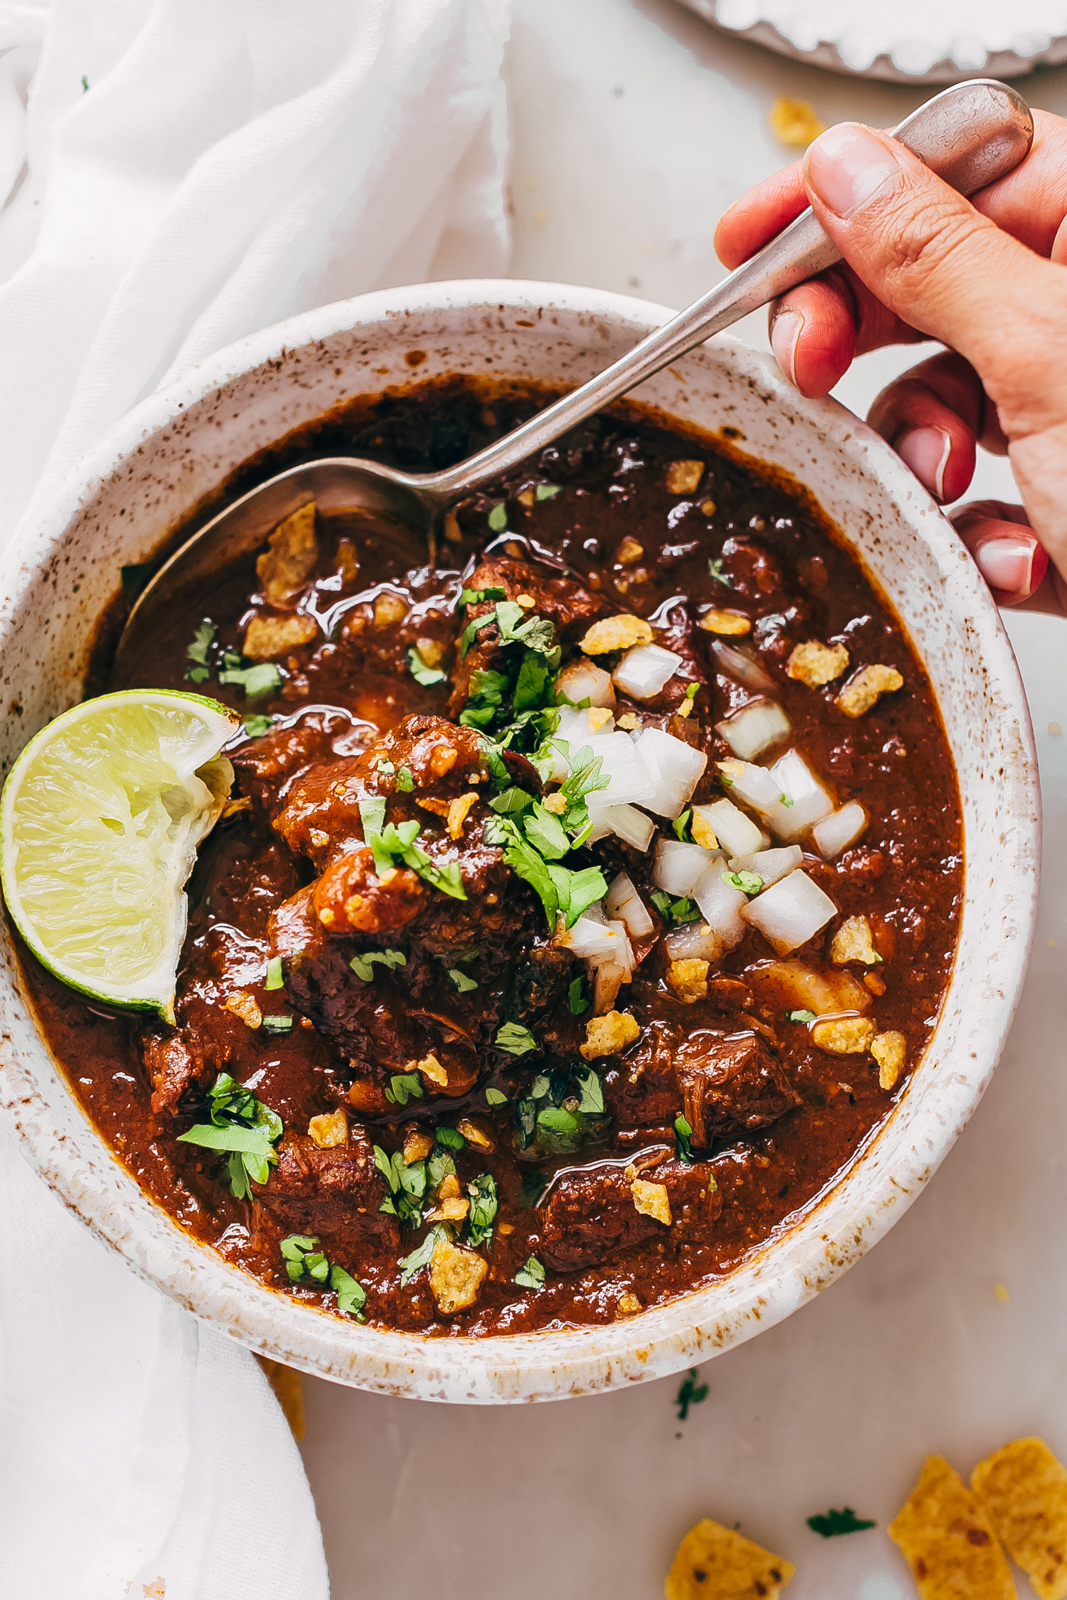 top shot of bowl filled with prepared stew meat chili with a hand holding a spoon in bowl